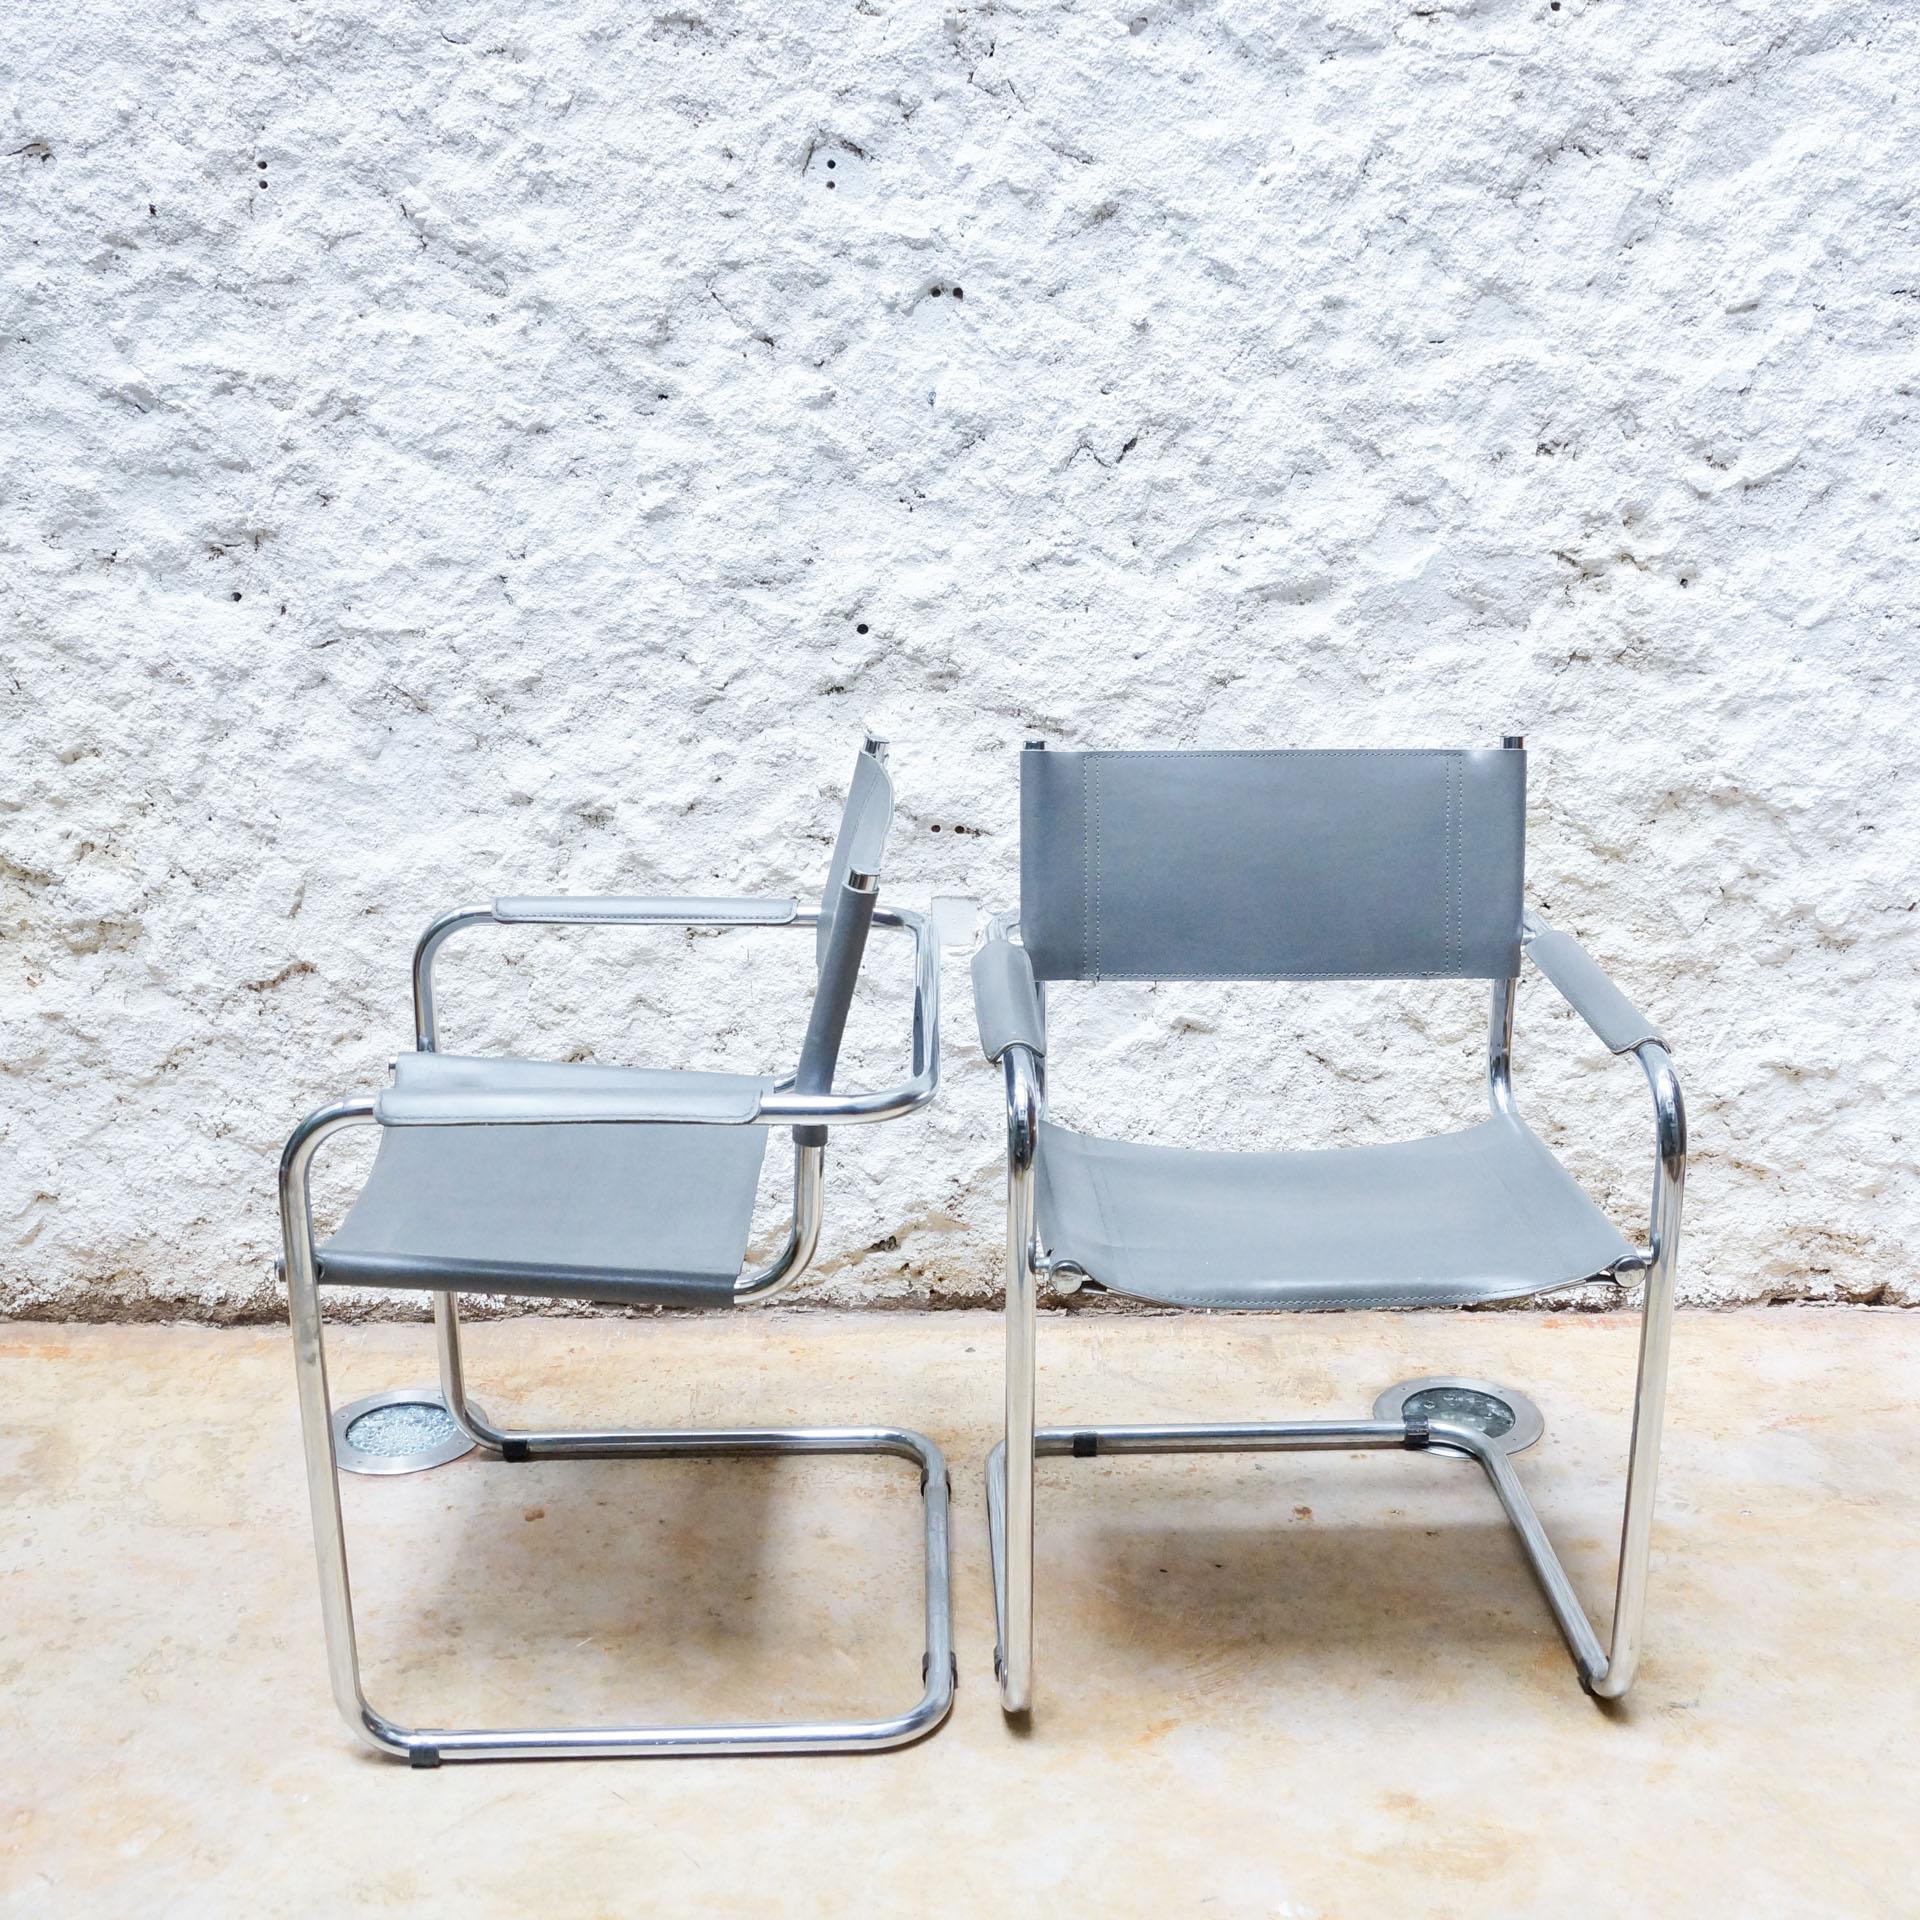 Chair designed by Marcel Breuer.
By unknown manufacturer, circa 1970.

Materials:
Leather
Tubular steel with a polished chrome finish

In good original condition, with minor wear consistent with age and use, preserving a beautiful